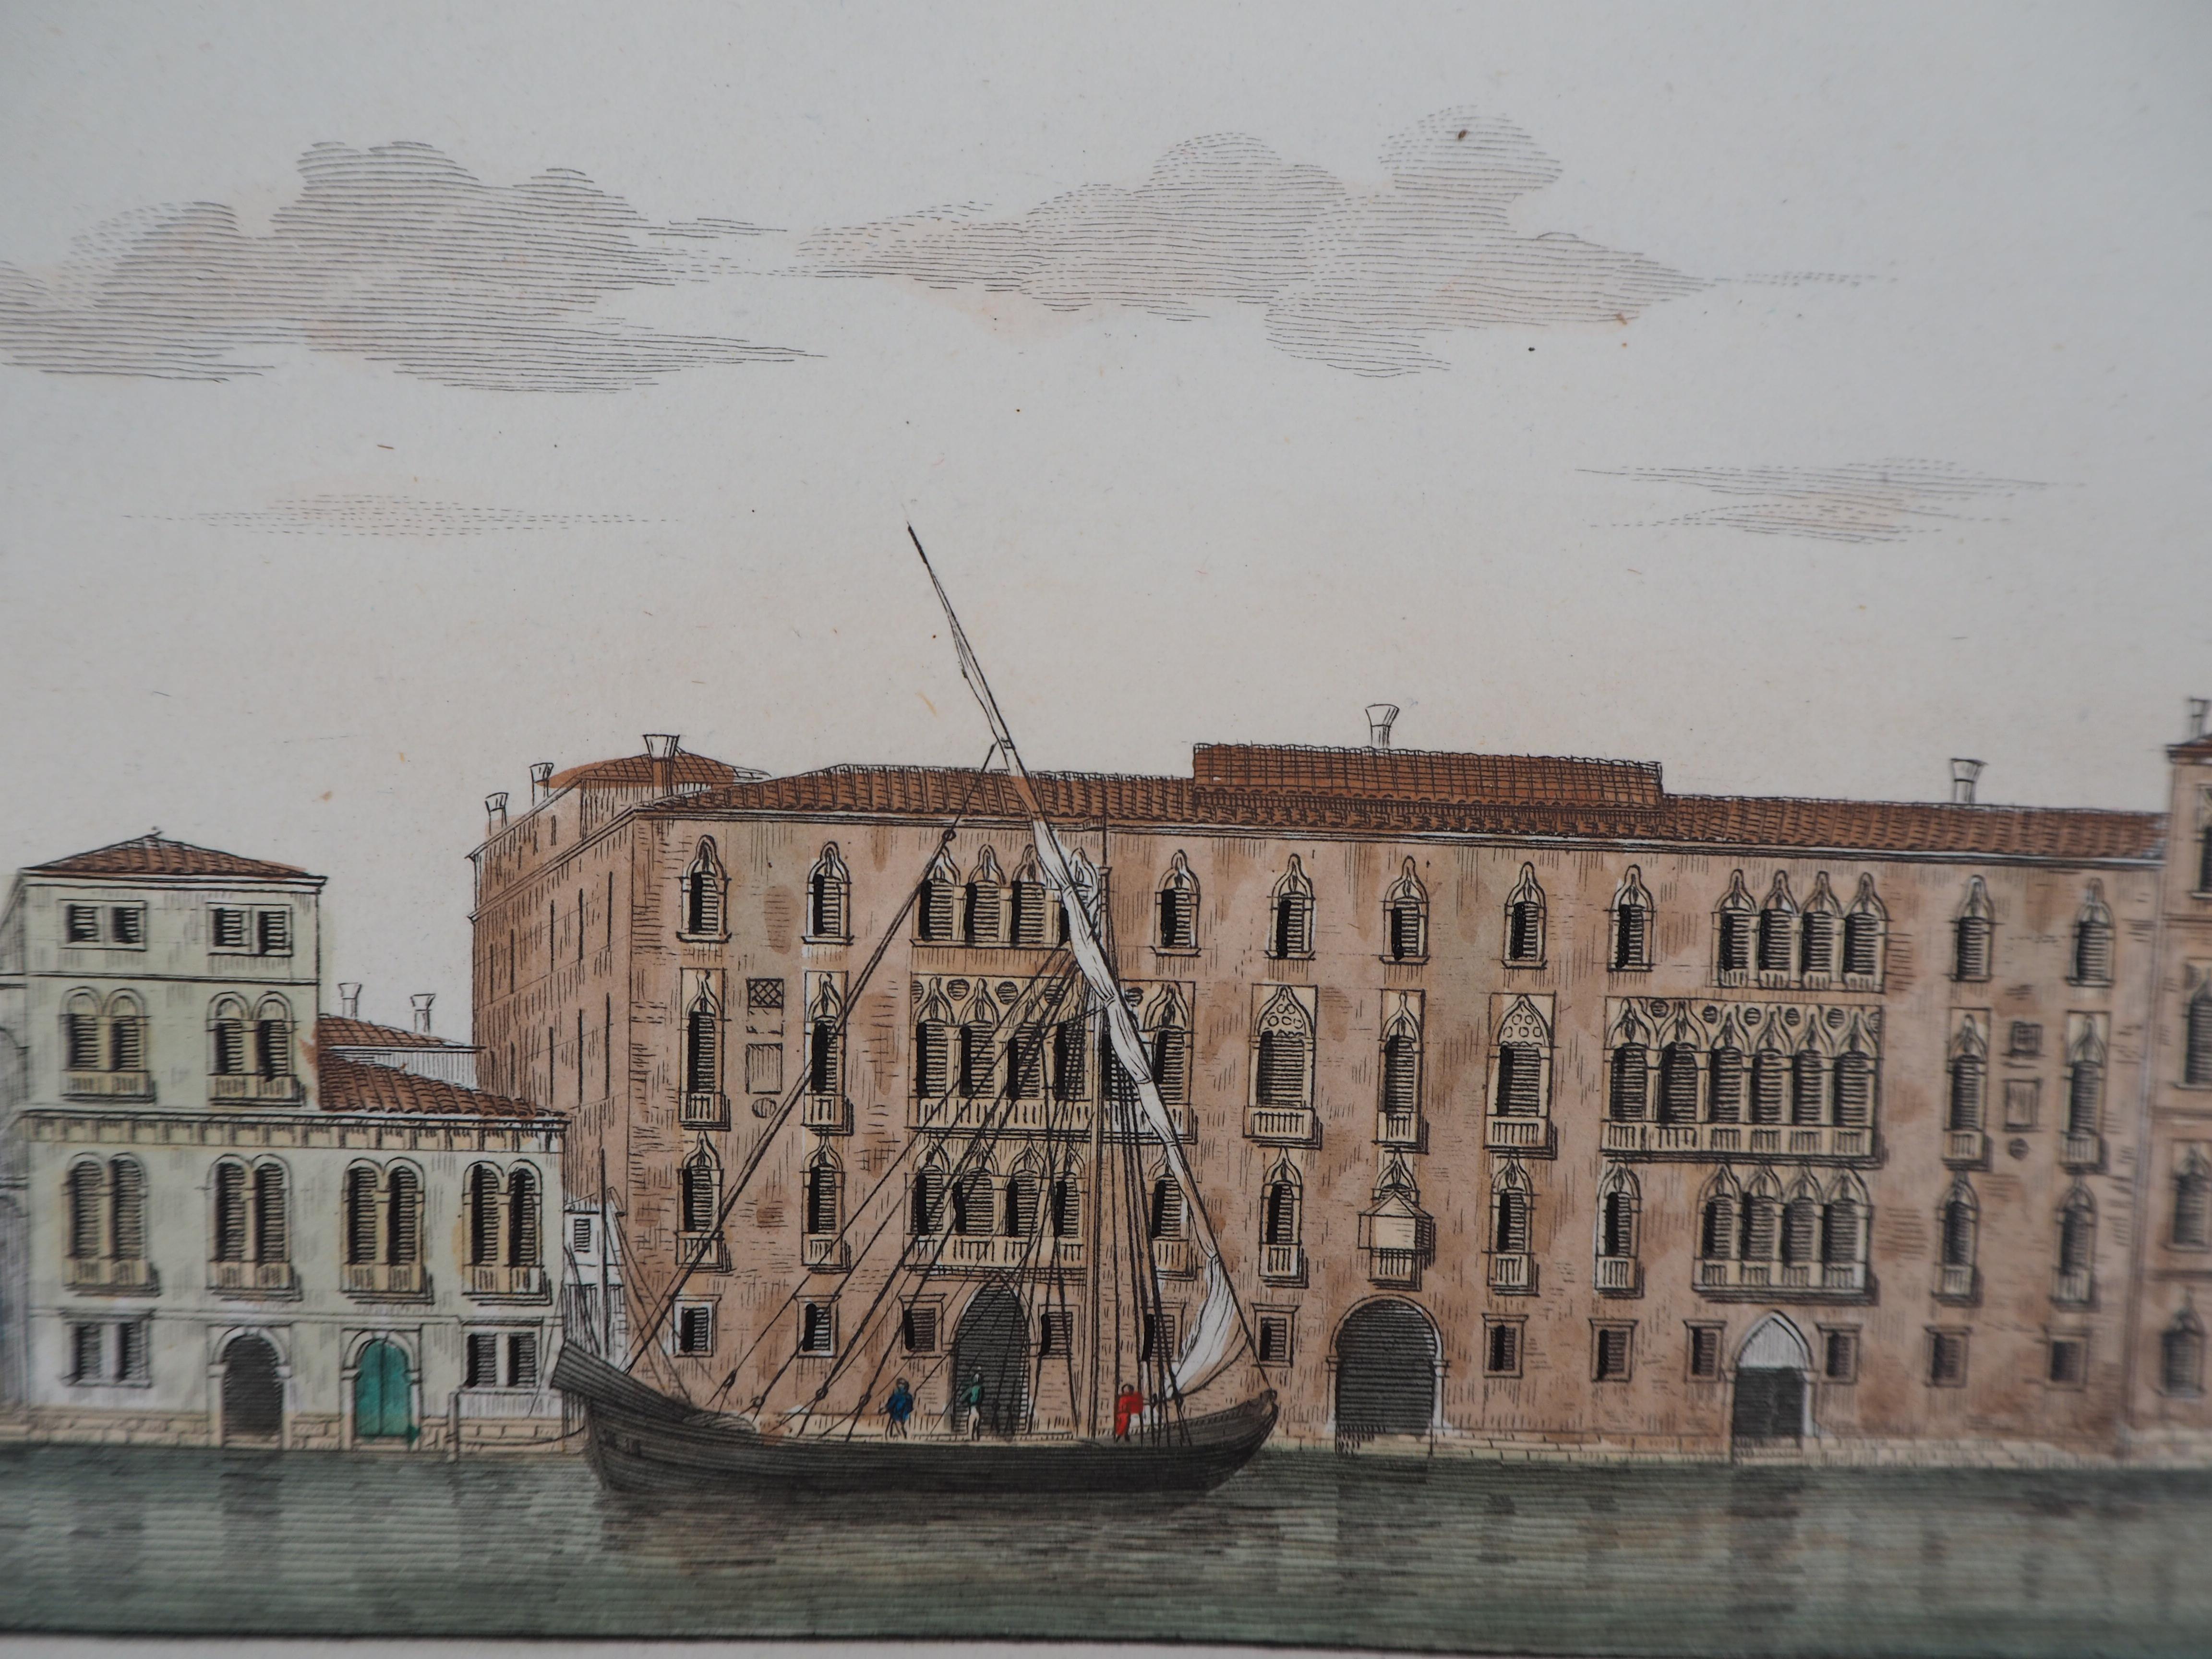 Dionisio MORETTI 
View of the Grand Canal, 1831

Original etching 
Finely enhanced by hand with watercolor
On vellum  26 x 41 cm (c. 10.2 x 16 inch)

Very good condition, slight foxings on the edges (see pictures)